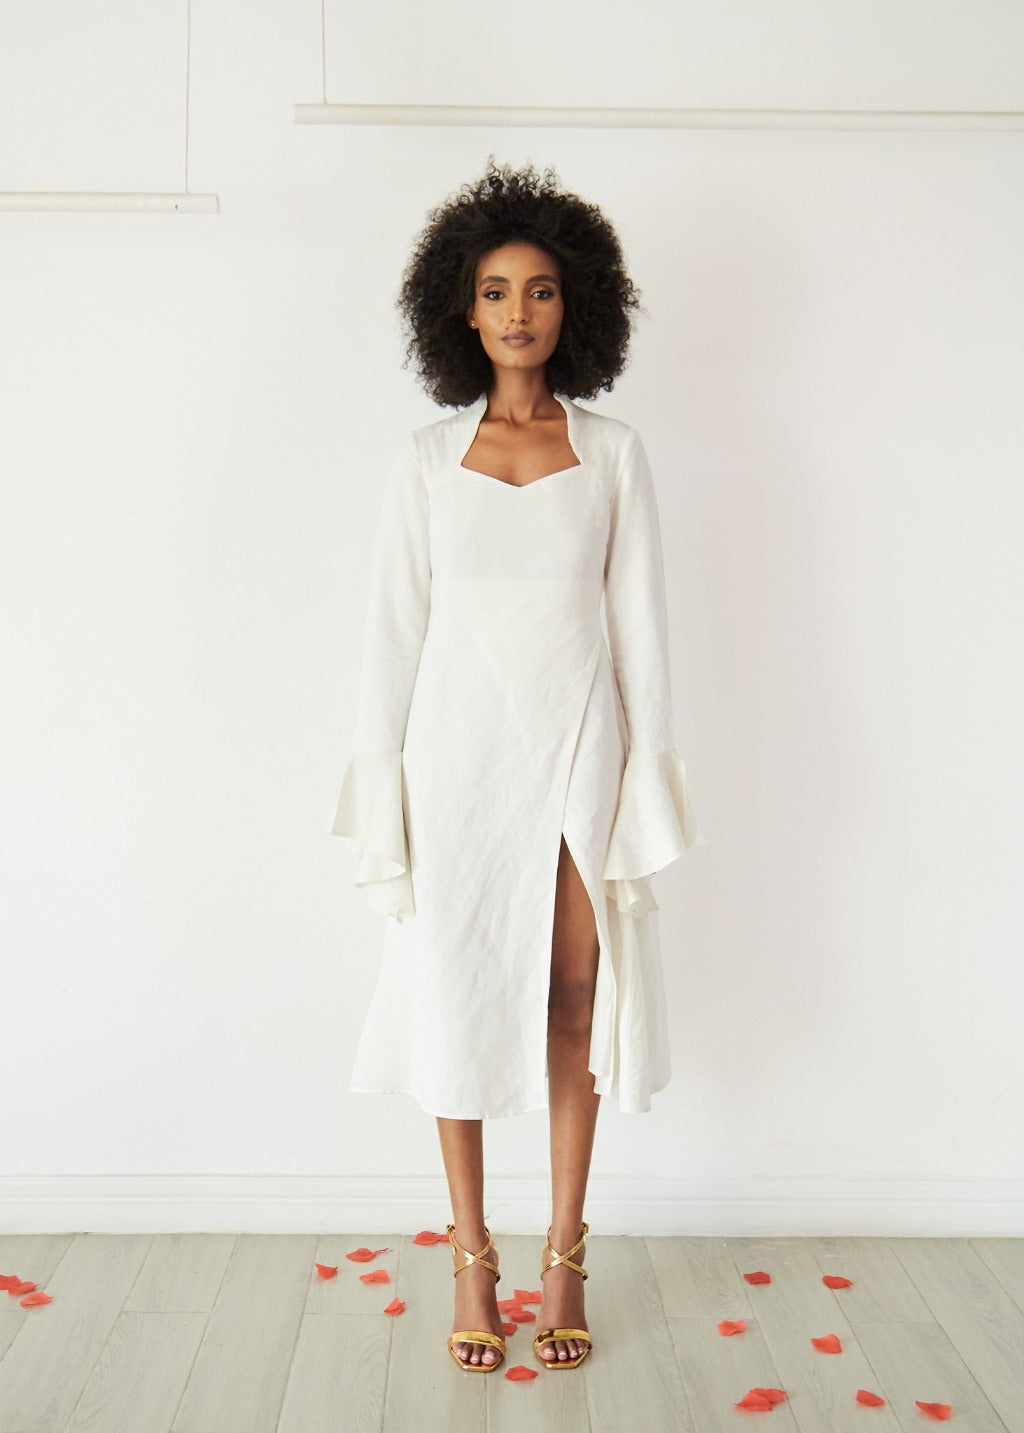 A model wearing a white linen dress with a side slit in a white room